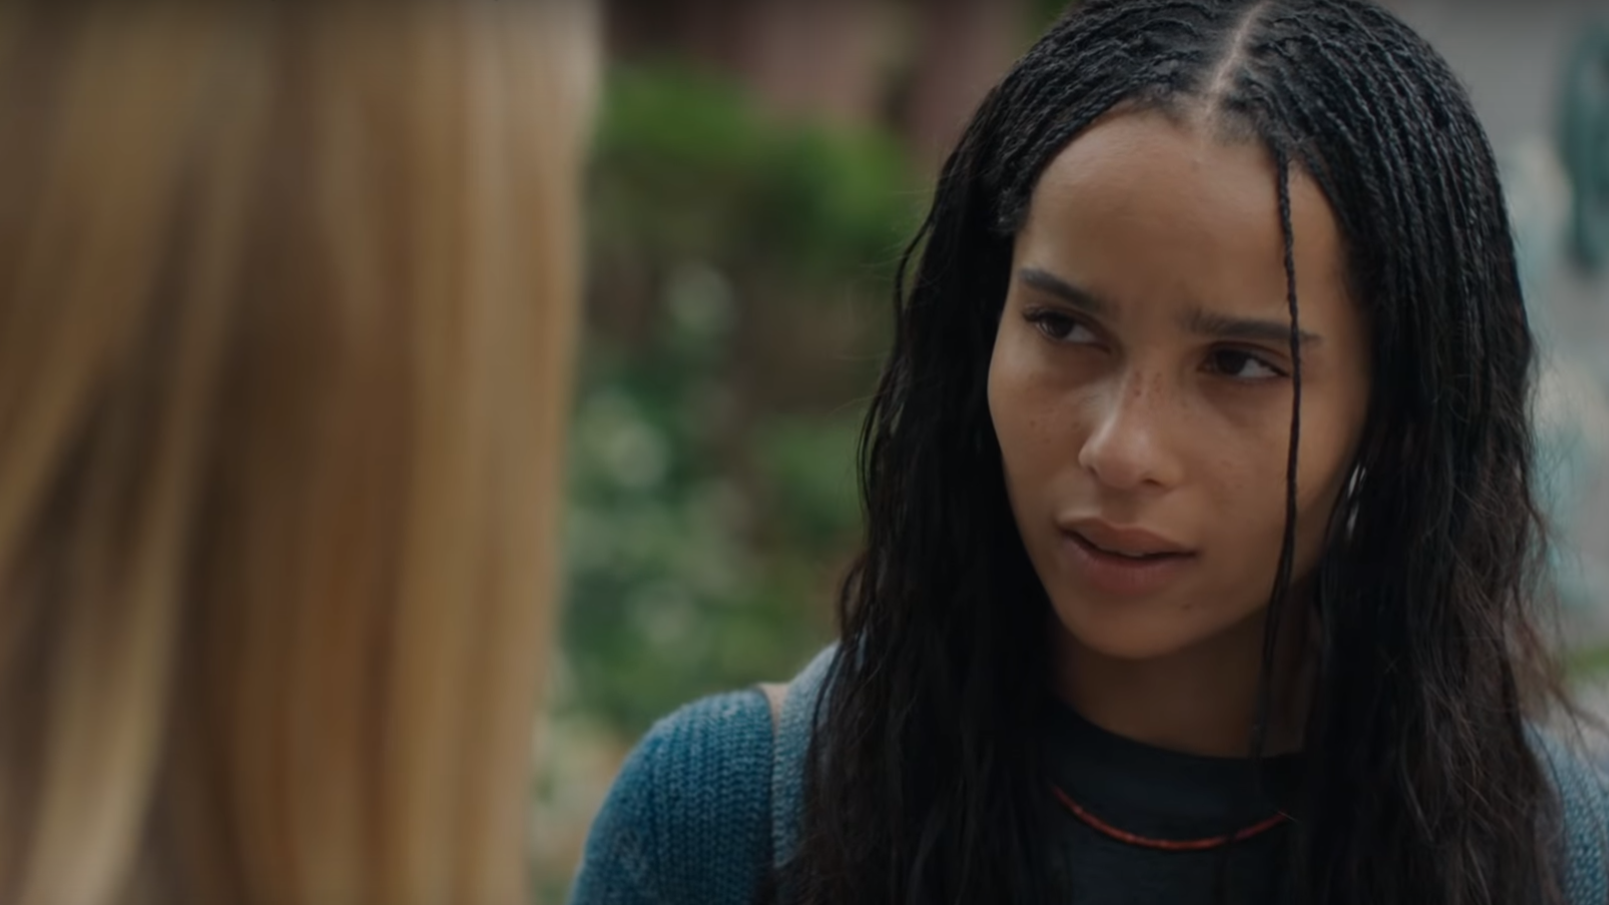 Zoë Kravitz Will Star in and Produce Bank Robber Pic “The Sundance Kid Might Have Some Regrets”